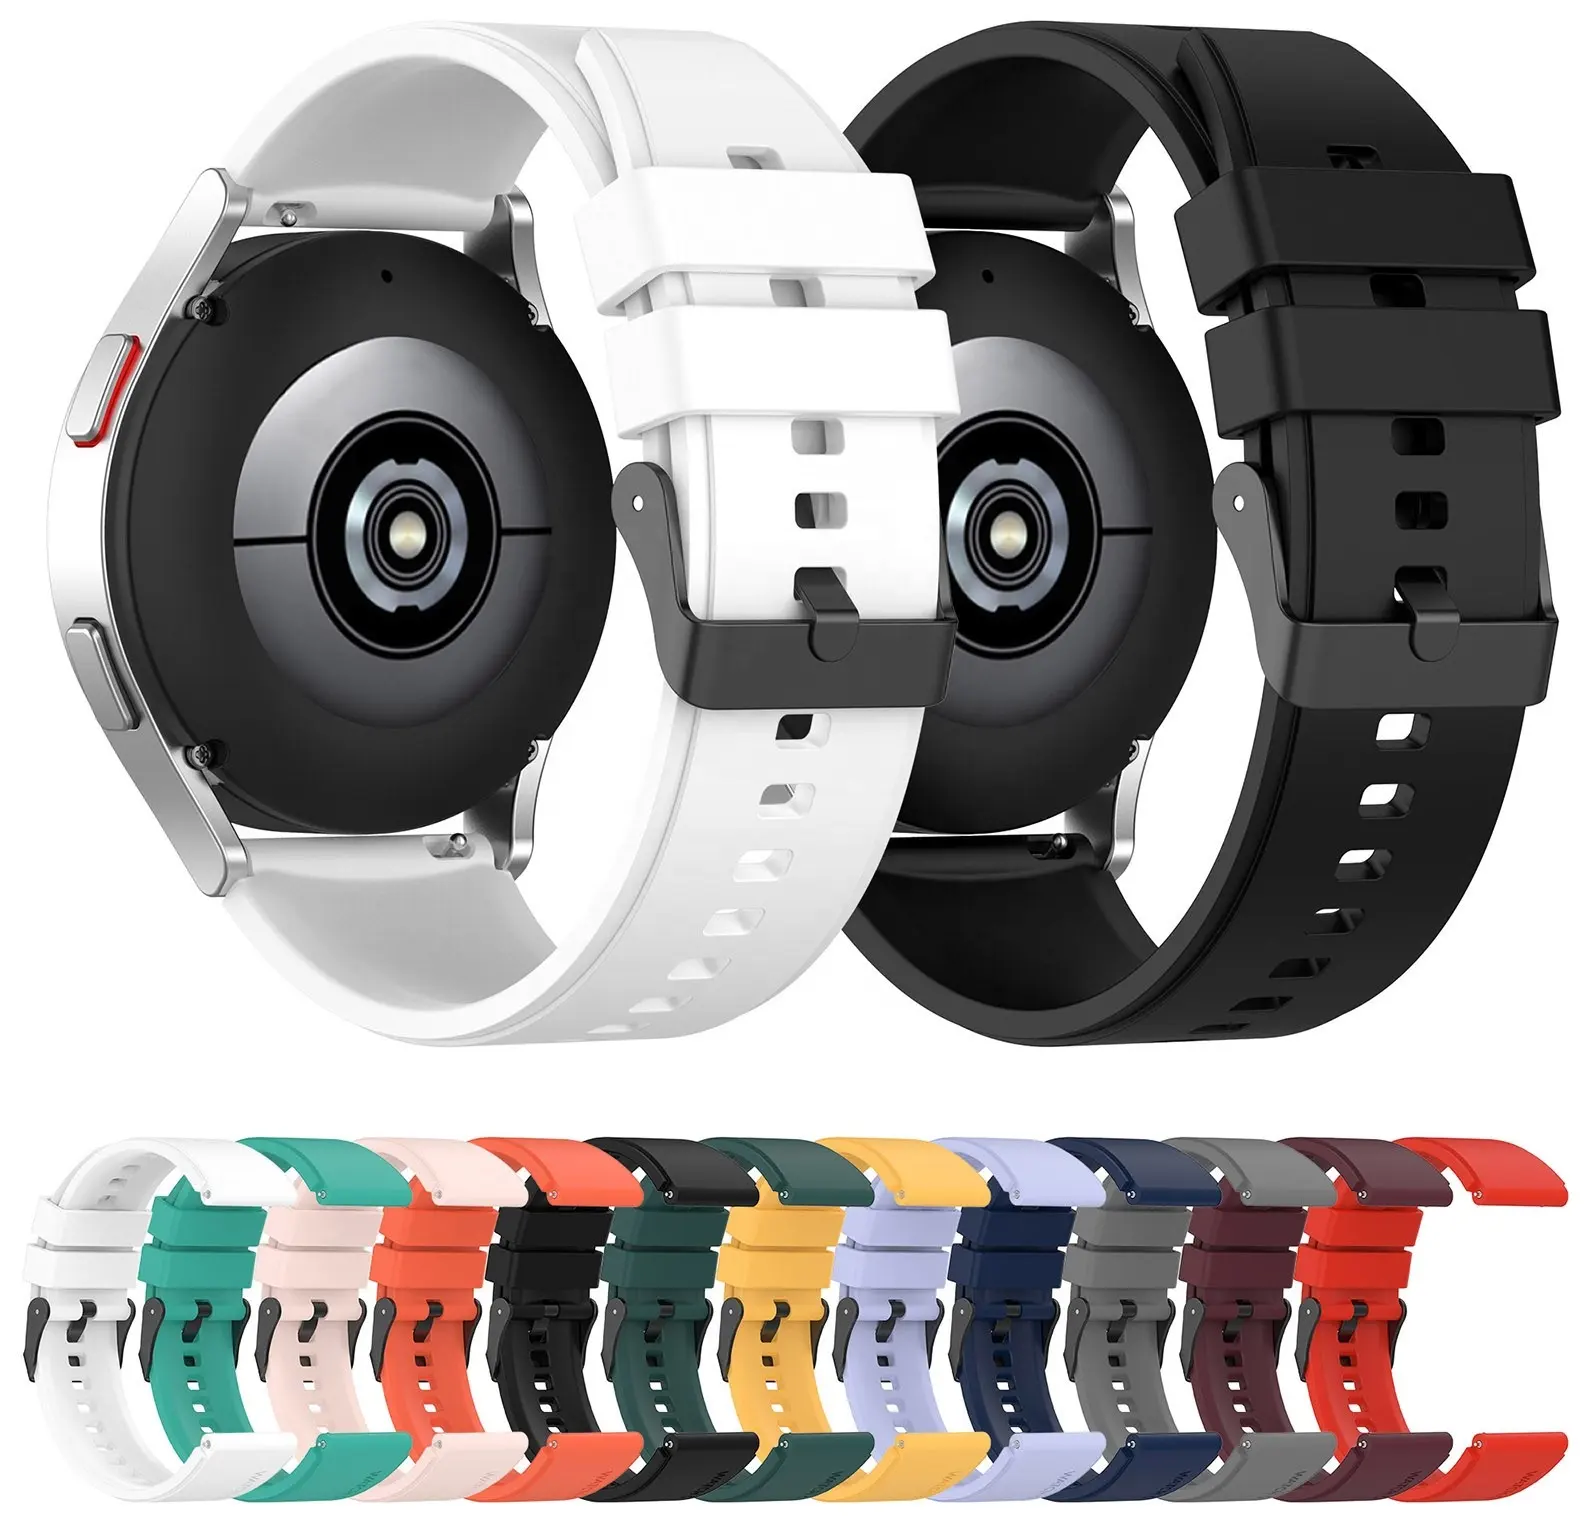 Black Buckle Wristband Silicone Band For Samsung Galaxy Watch 5 Colorful Watch Strap For Samsung Galaxy 5 Pro